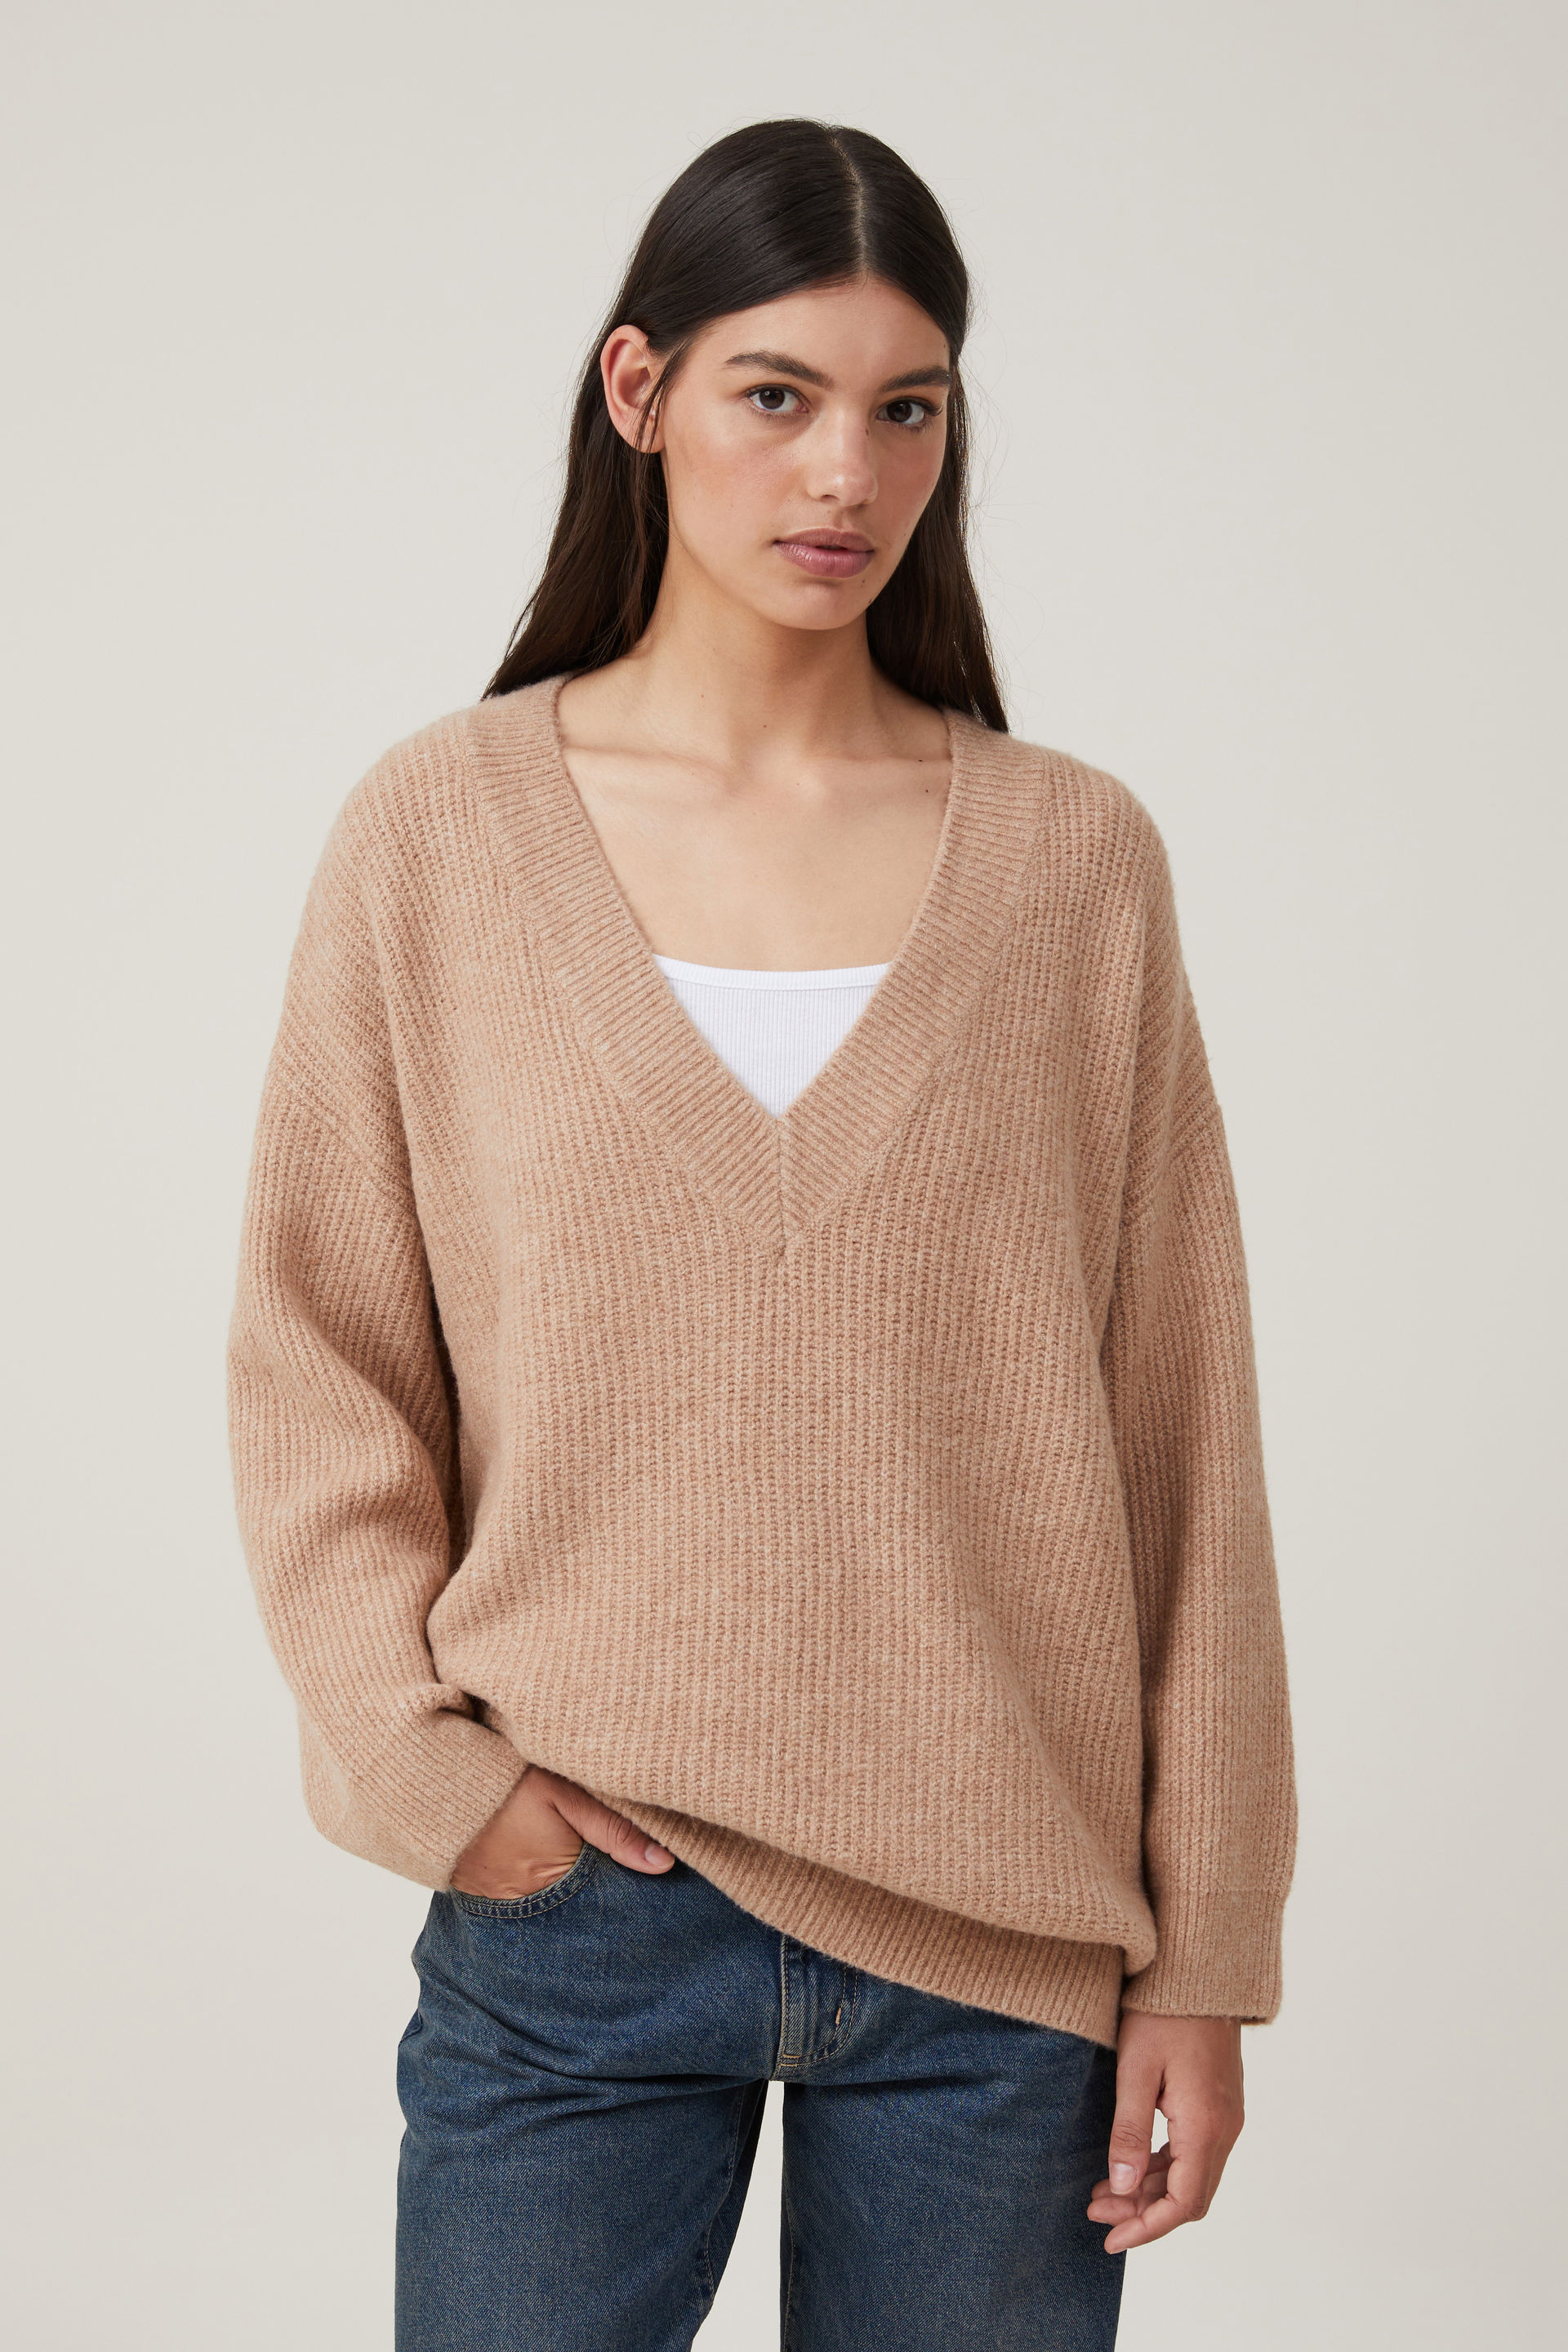 Cotton On Women - Everything Slouchy V Neck Pullover - Chestnut marle